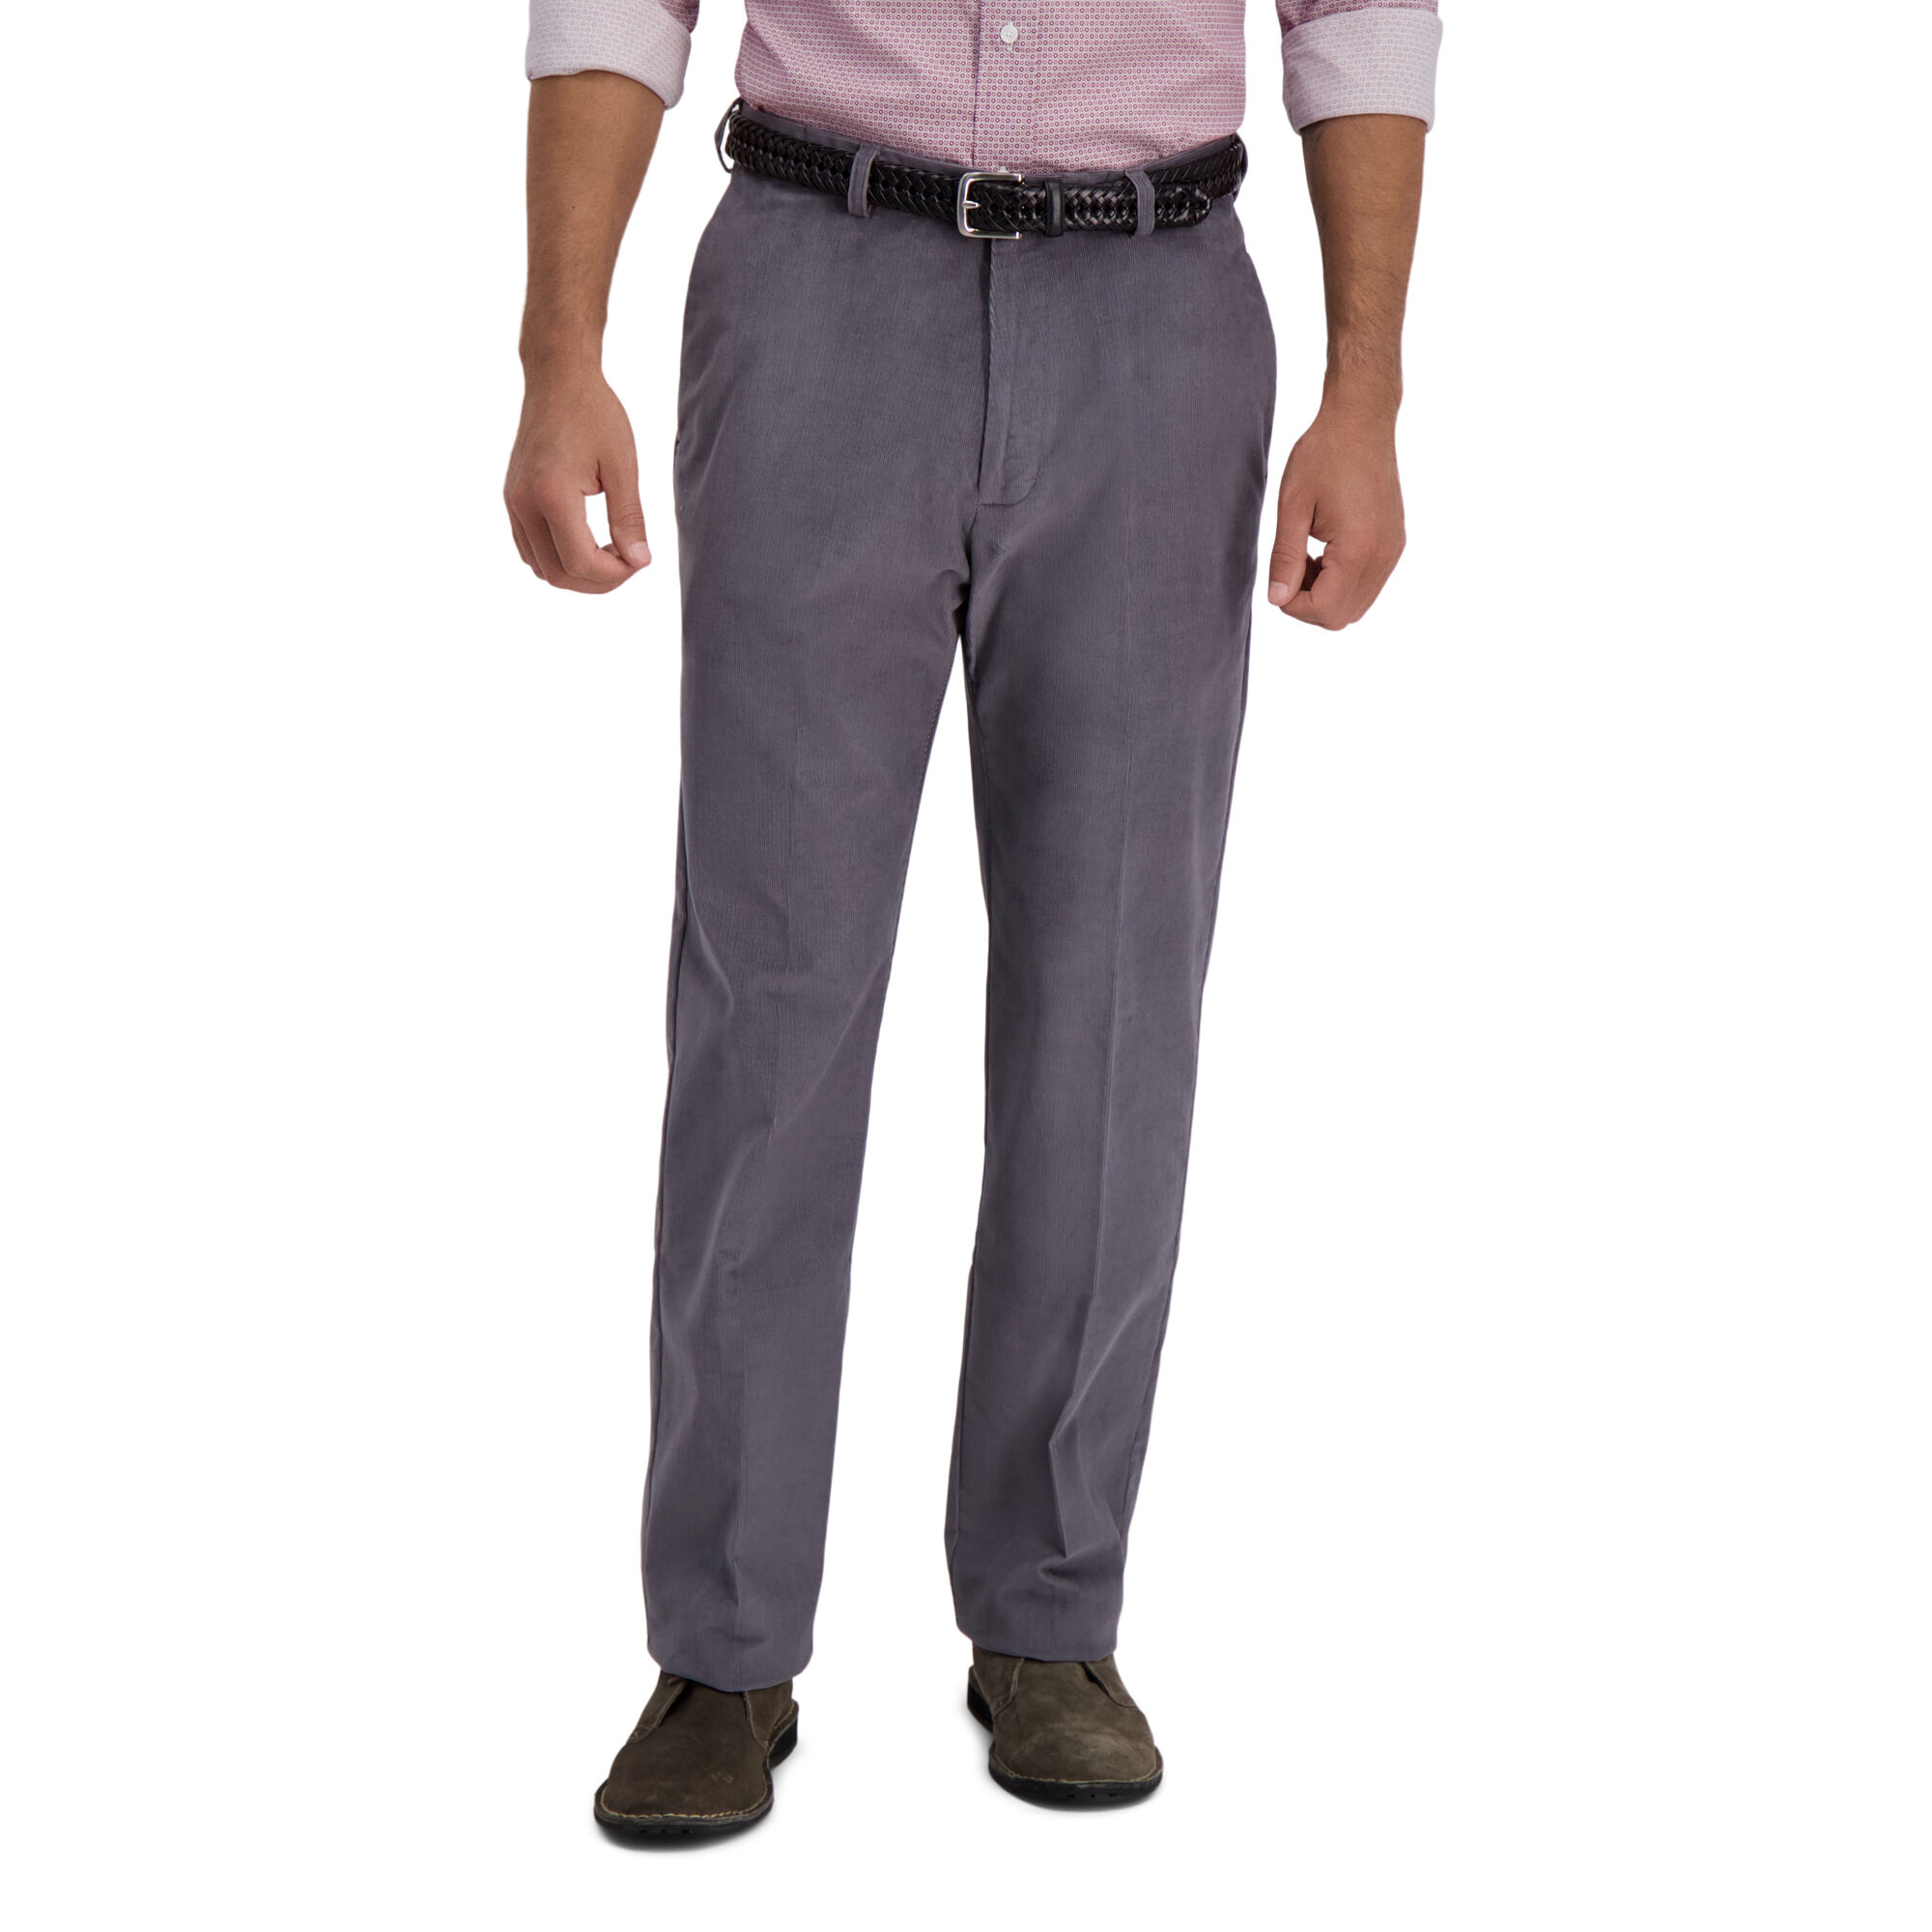 Mens Corduroy Trouser Pure Cotton Big Sizes 30 to 54 Waist Inside Leg 29 And 31